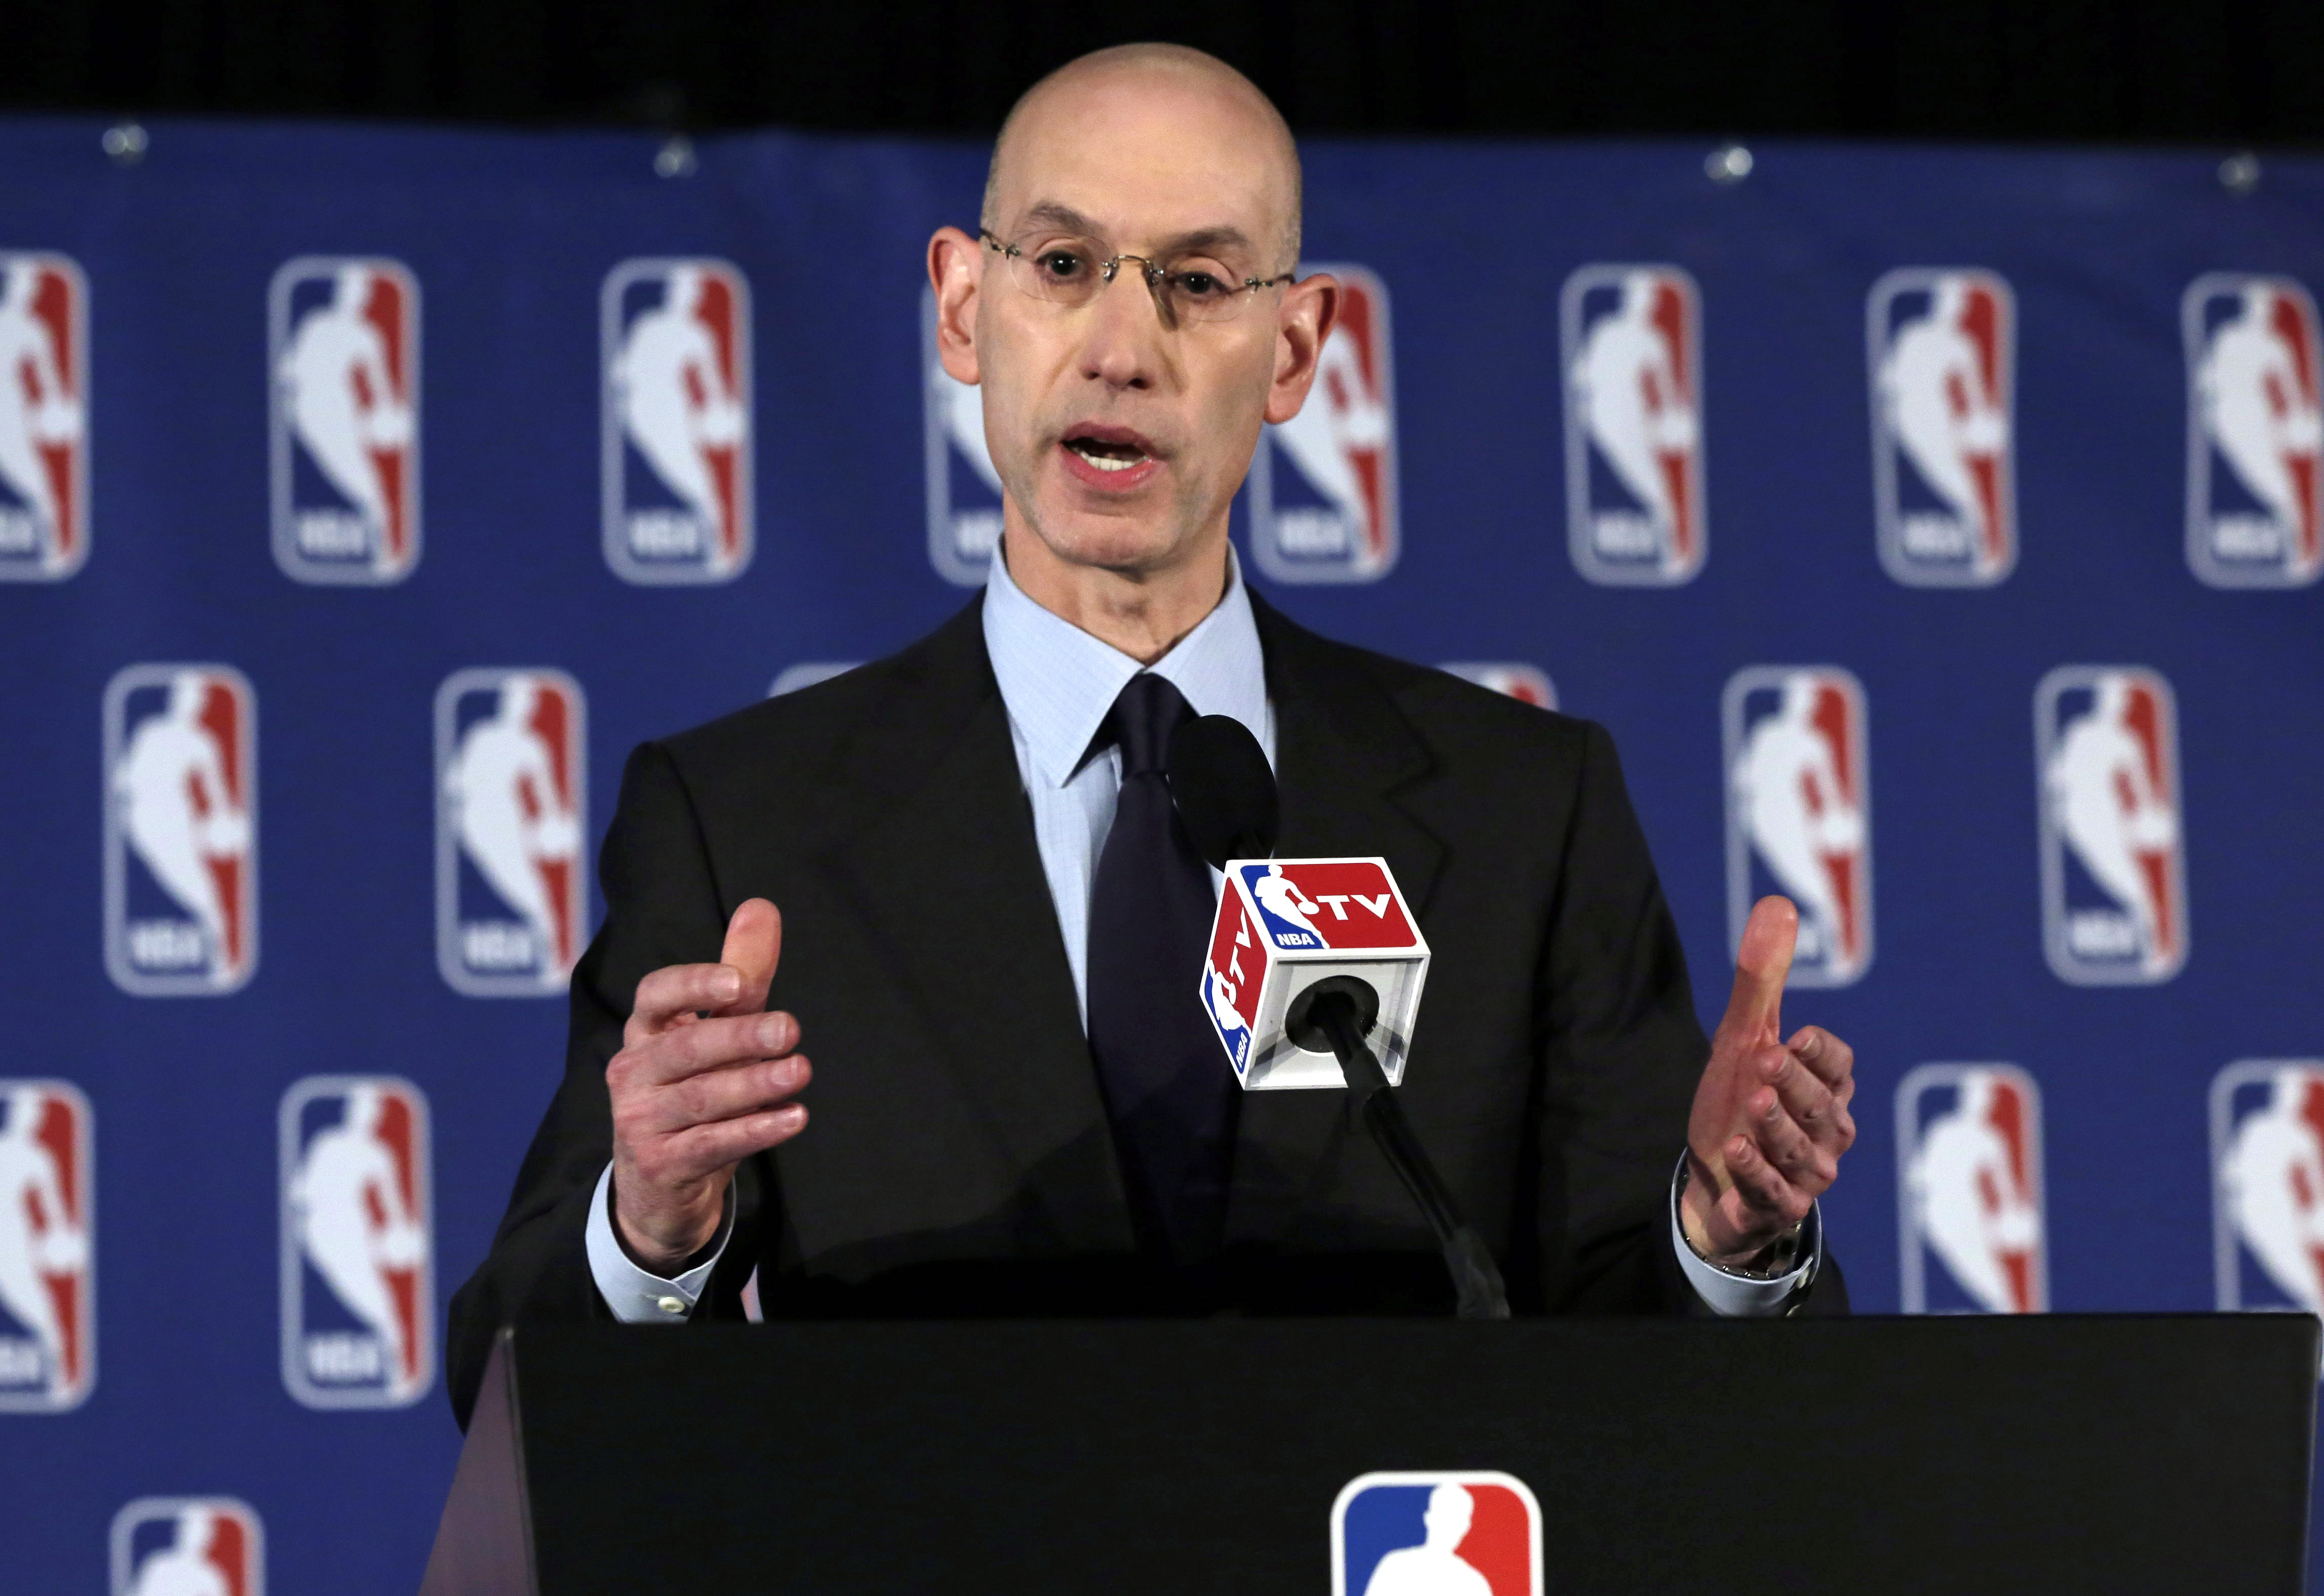 NBA Commissioner Adam Silver addresses the media during a news conference, in New York, Tuesday, April 29, 2014. Silver announced that Los Angeles Clippers owner Donald Sterling has been banned for life by the league in response to racist comments the league says he made in a recorded conversation. (AP Photo/Richard Drew)